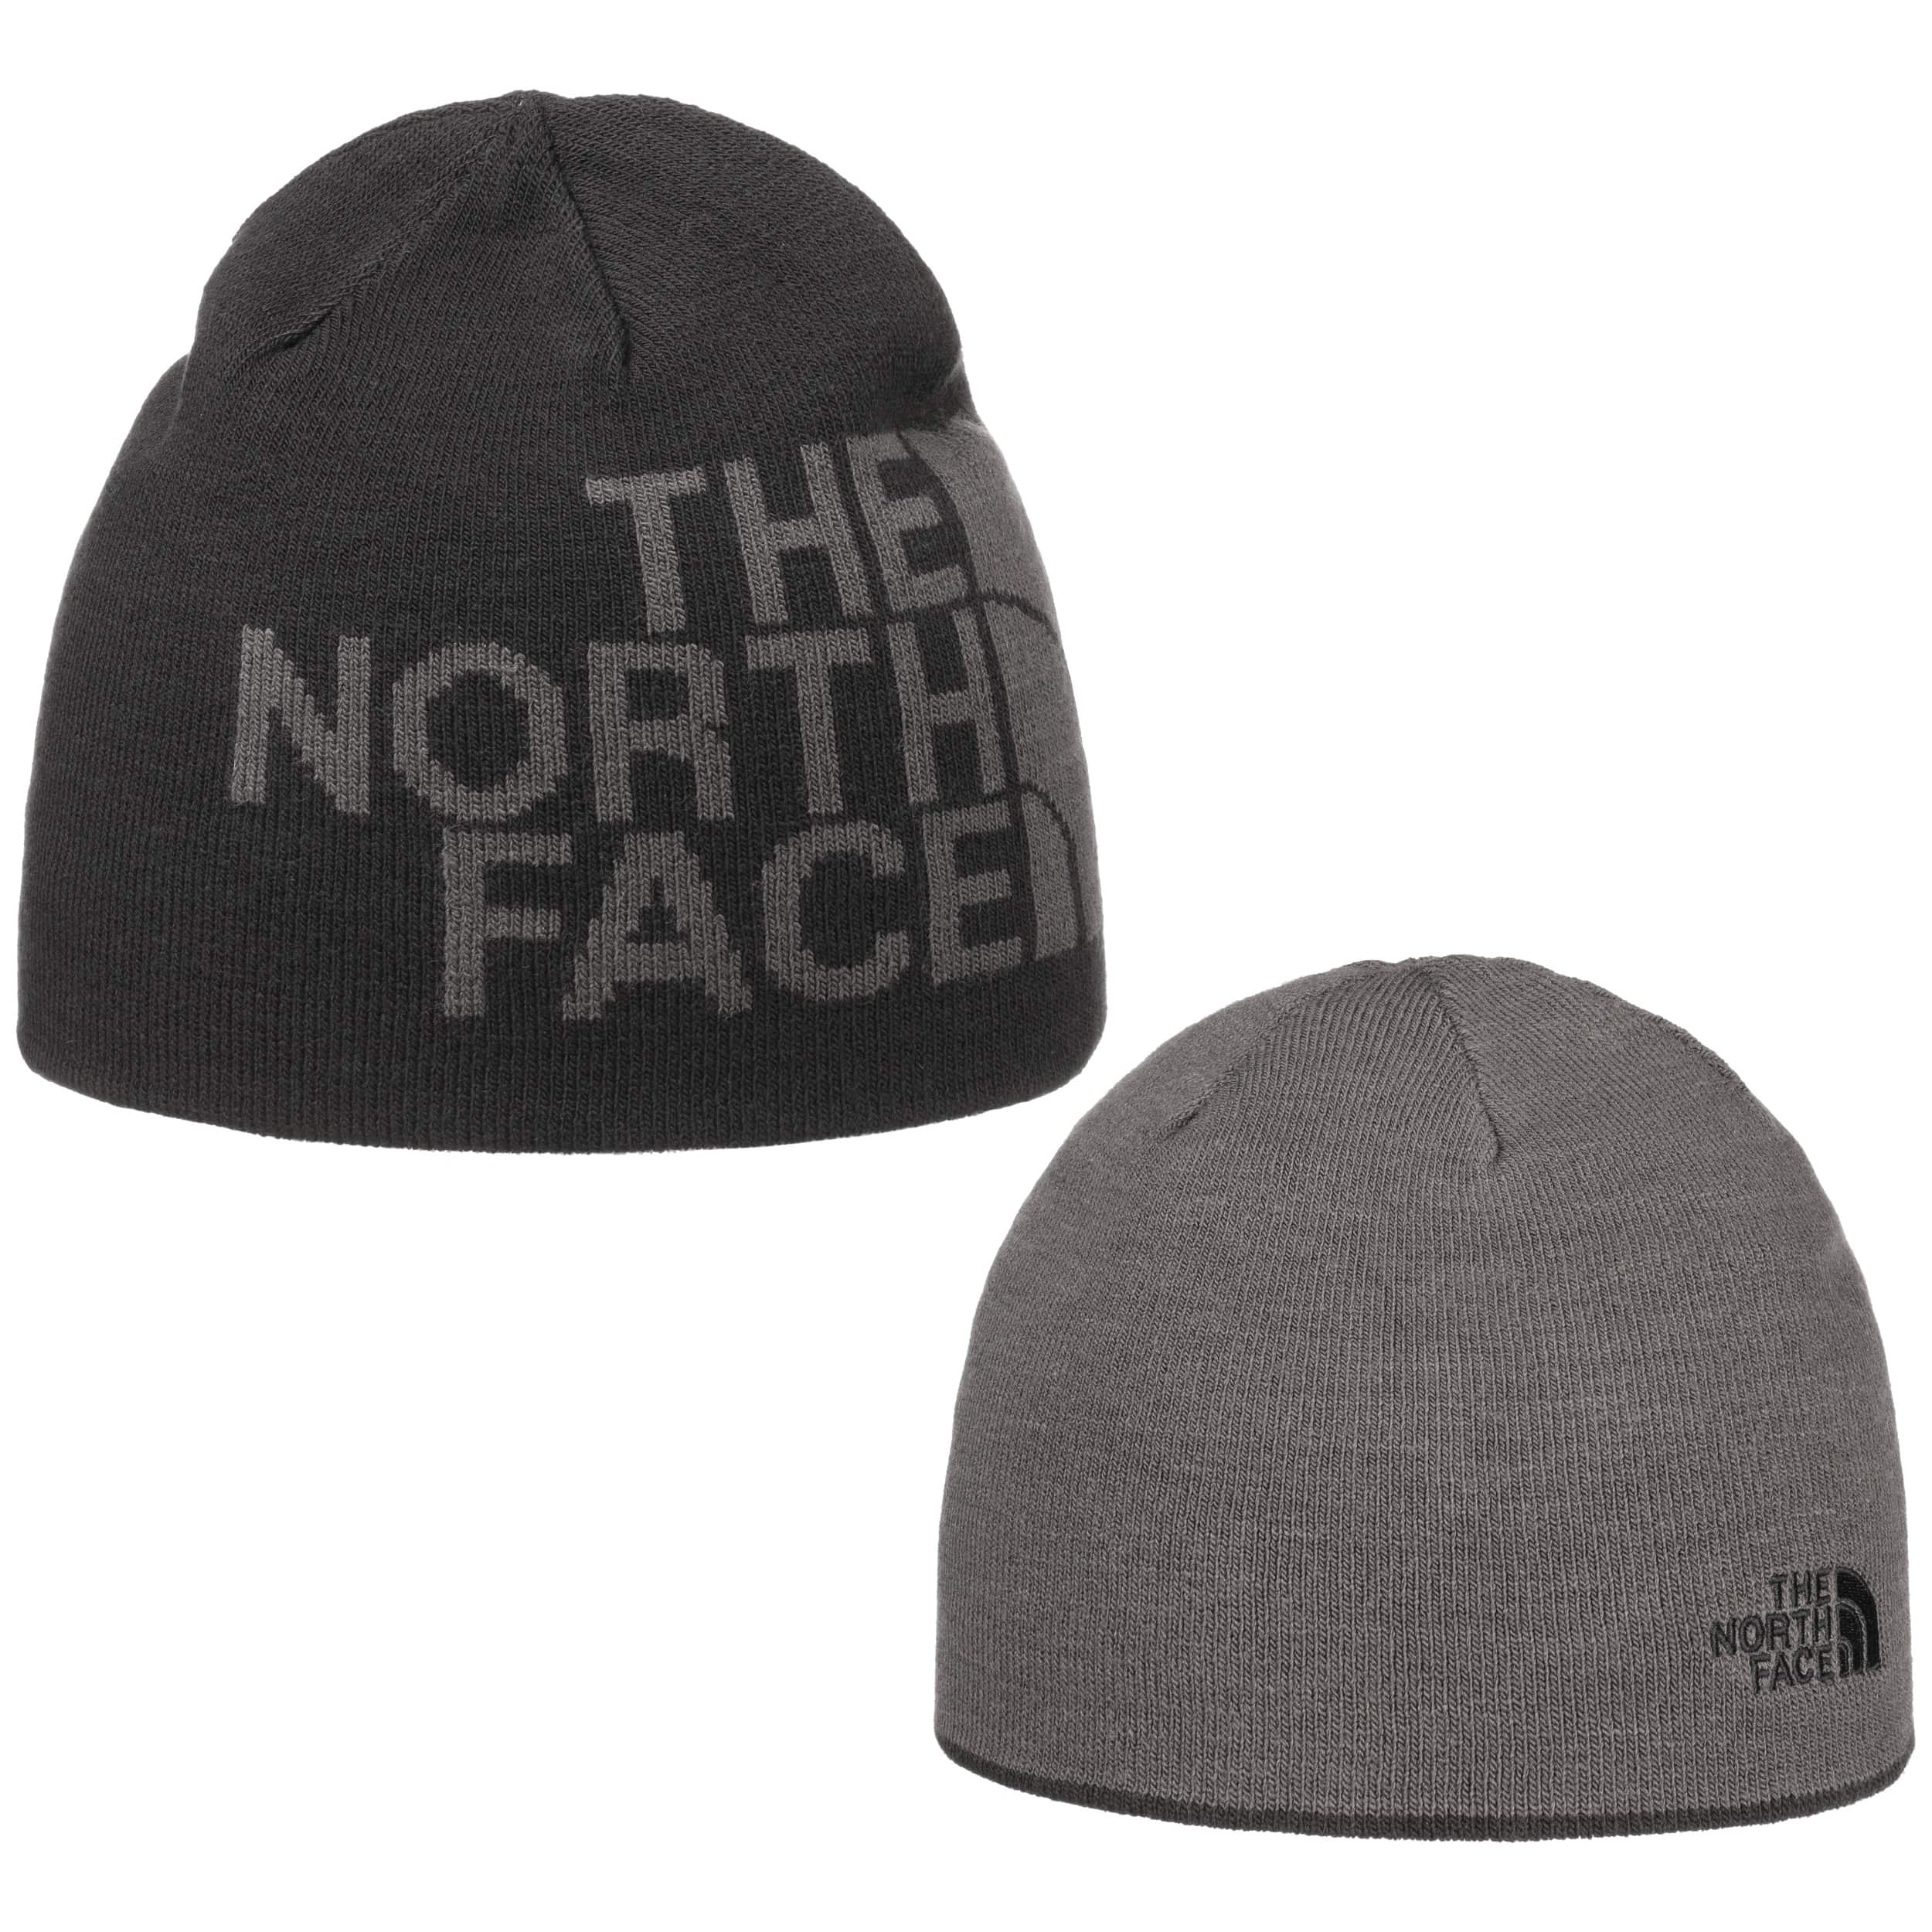 Rev Logo Beanie Hat by The North Face 